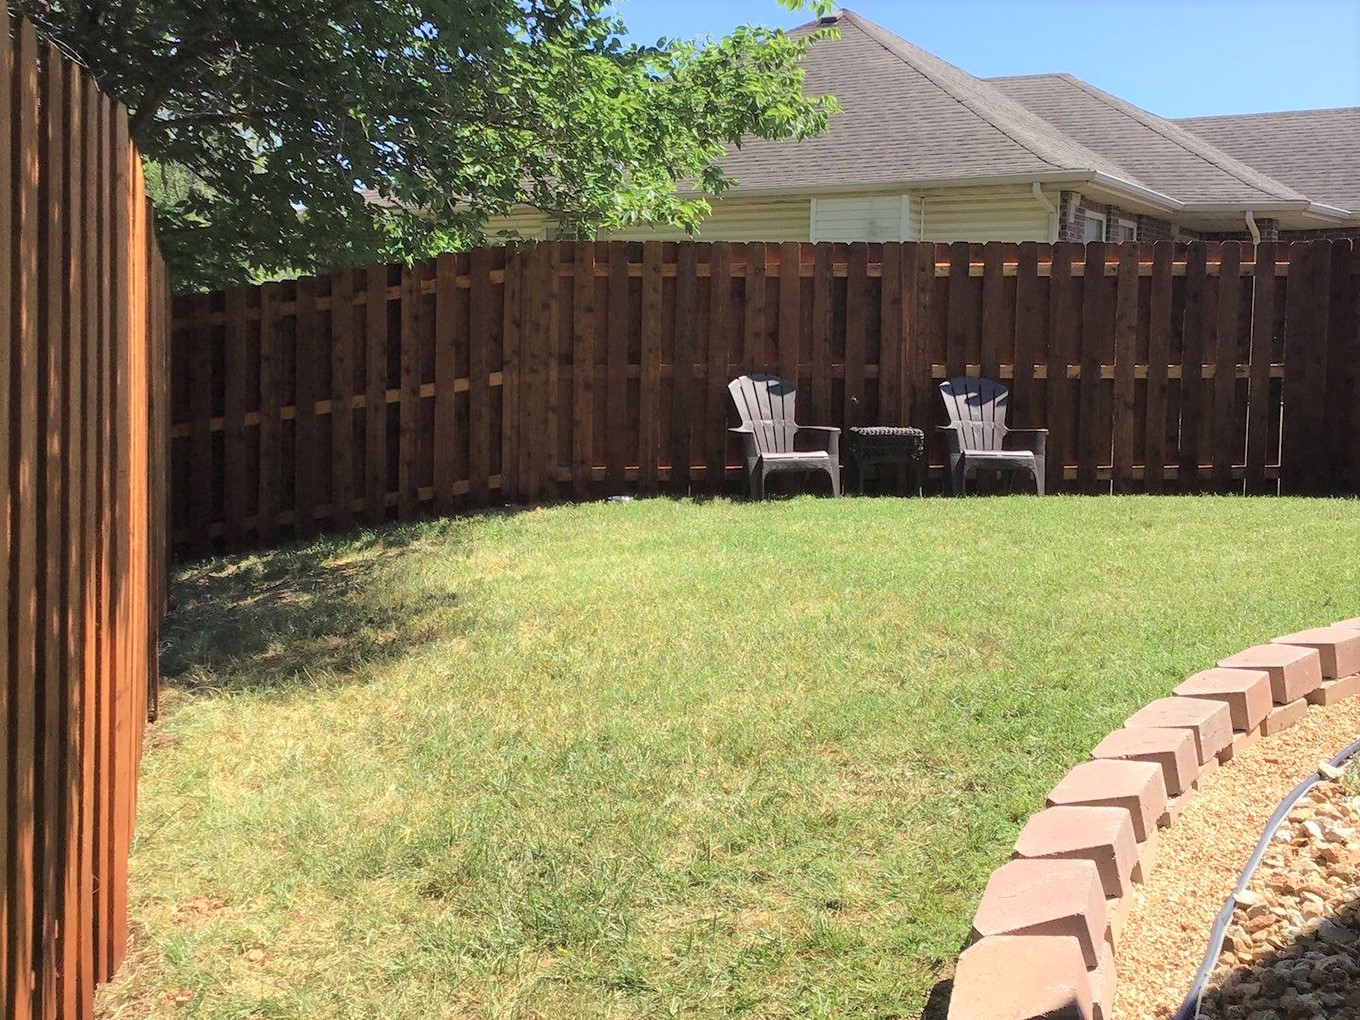 Photo of a Missouri wood fence installed on a slope